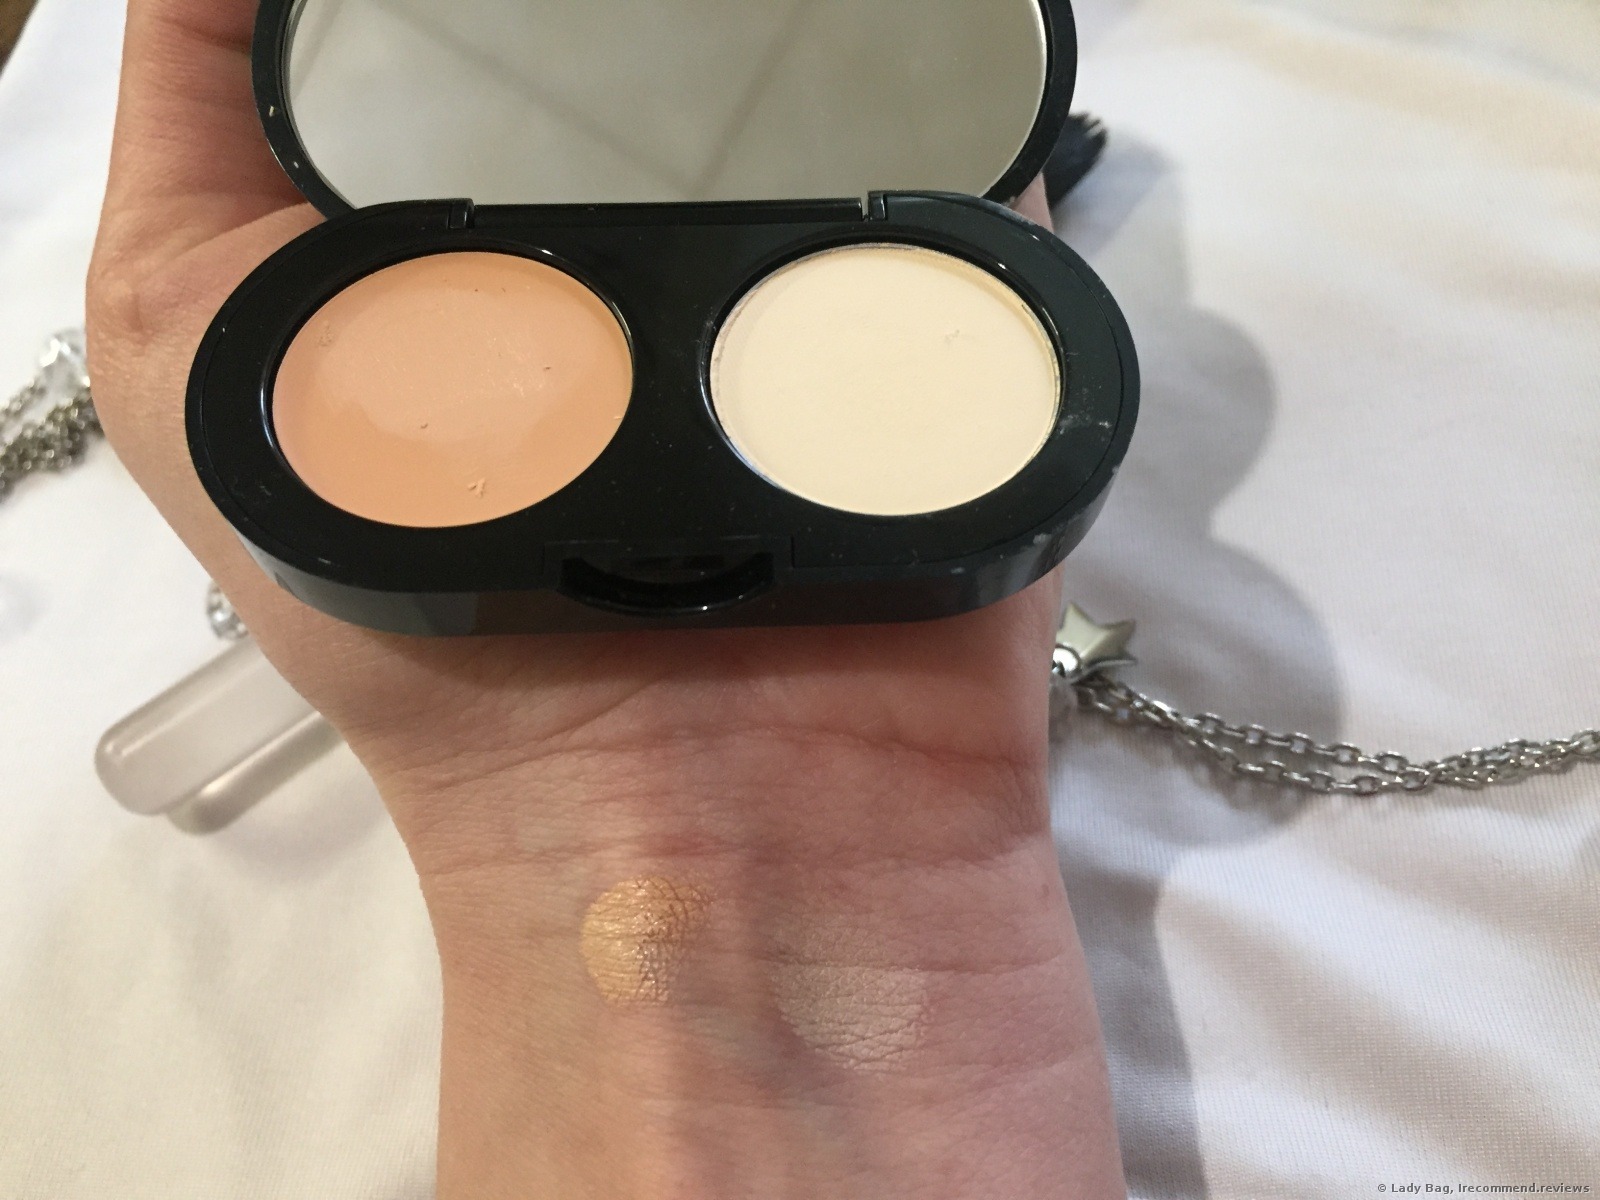 Tøm skraldespanden fremstille gardin Bobbi Brown Creamy Concealer Kit - «A compact concealer and powder in one.  Good coverage and natural finish. And there are many more praises to Bobbi  Brown in the review. Is the